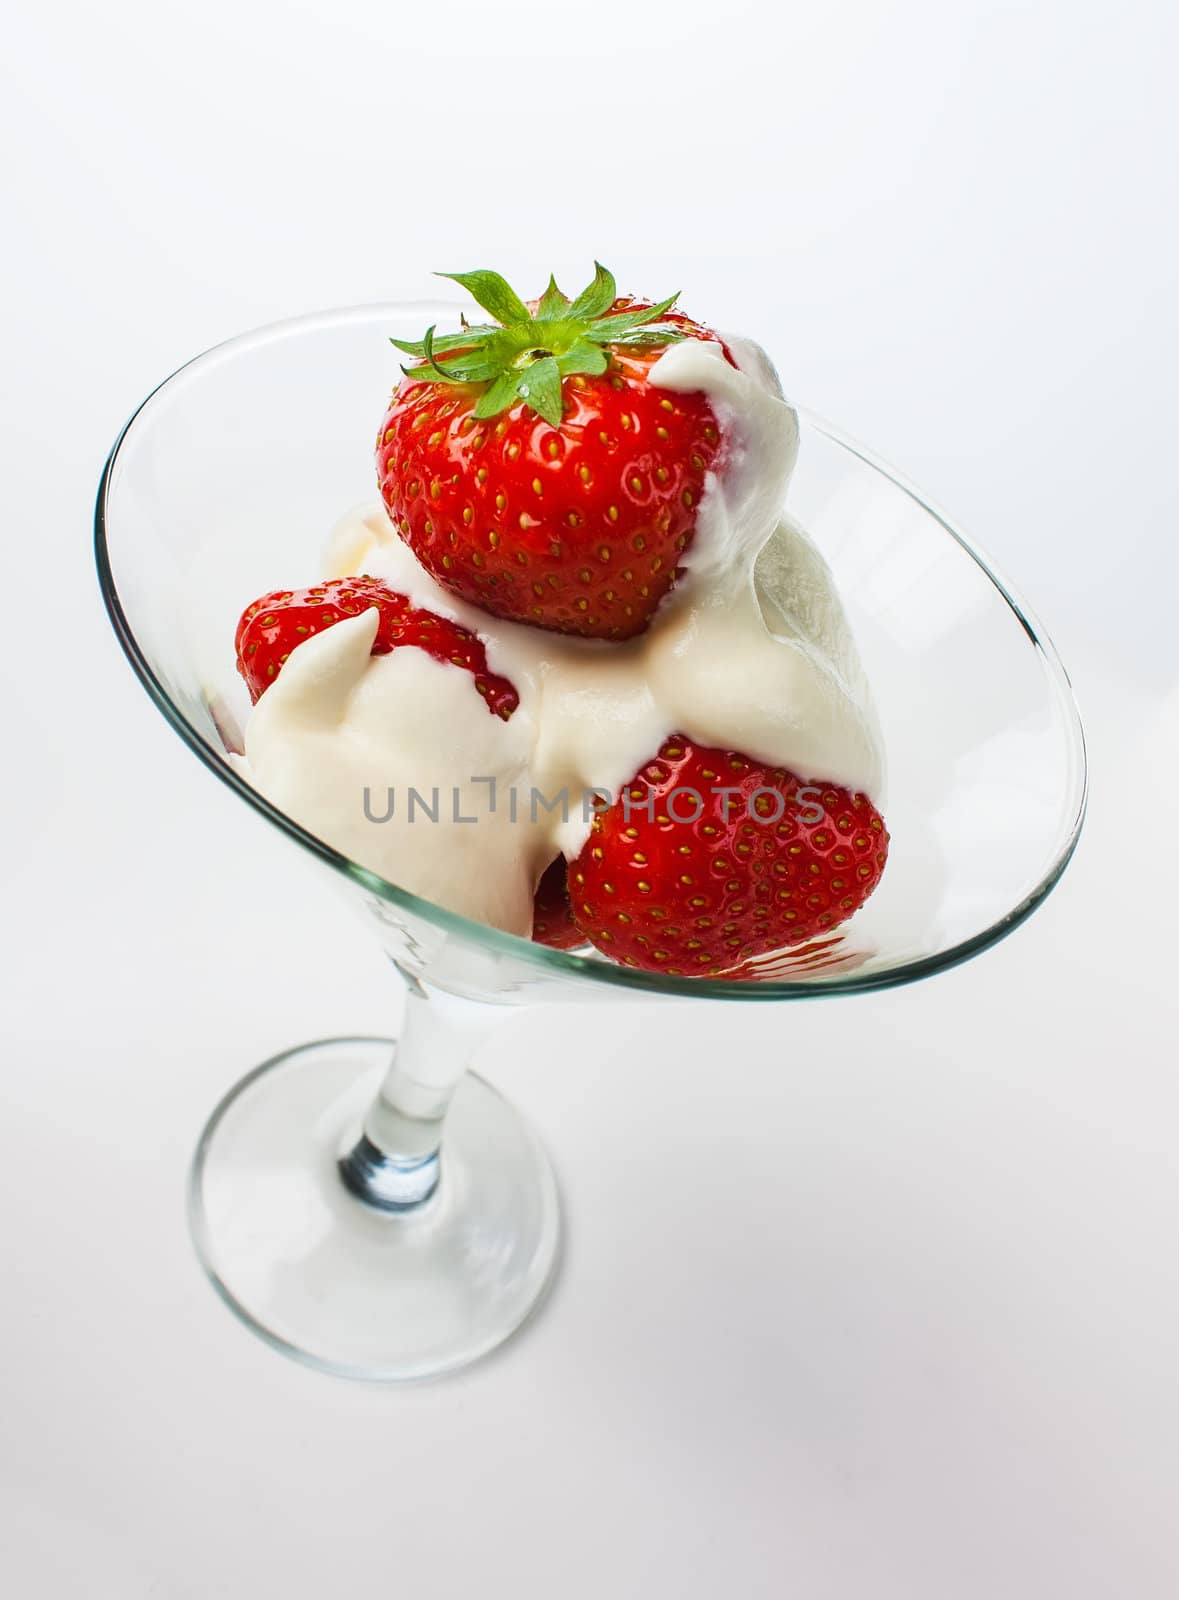 Strawberries with whipped cream and mint leaf in a glass on a white background